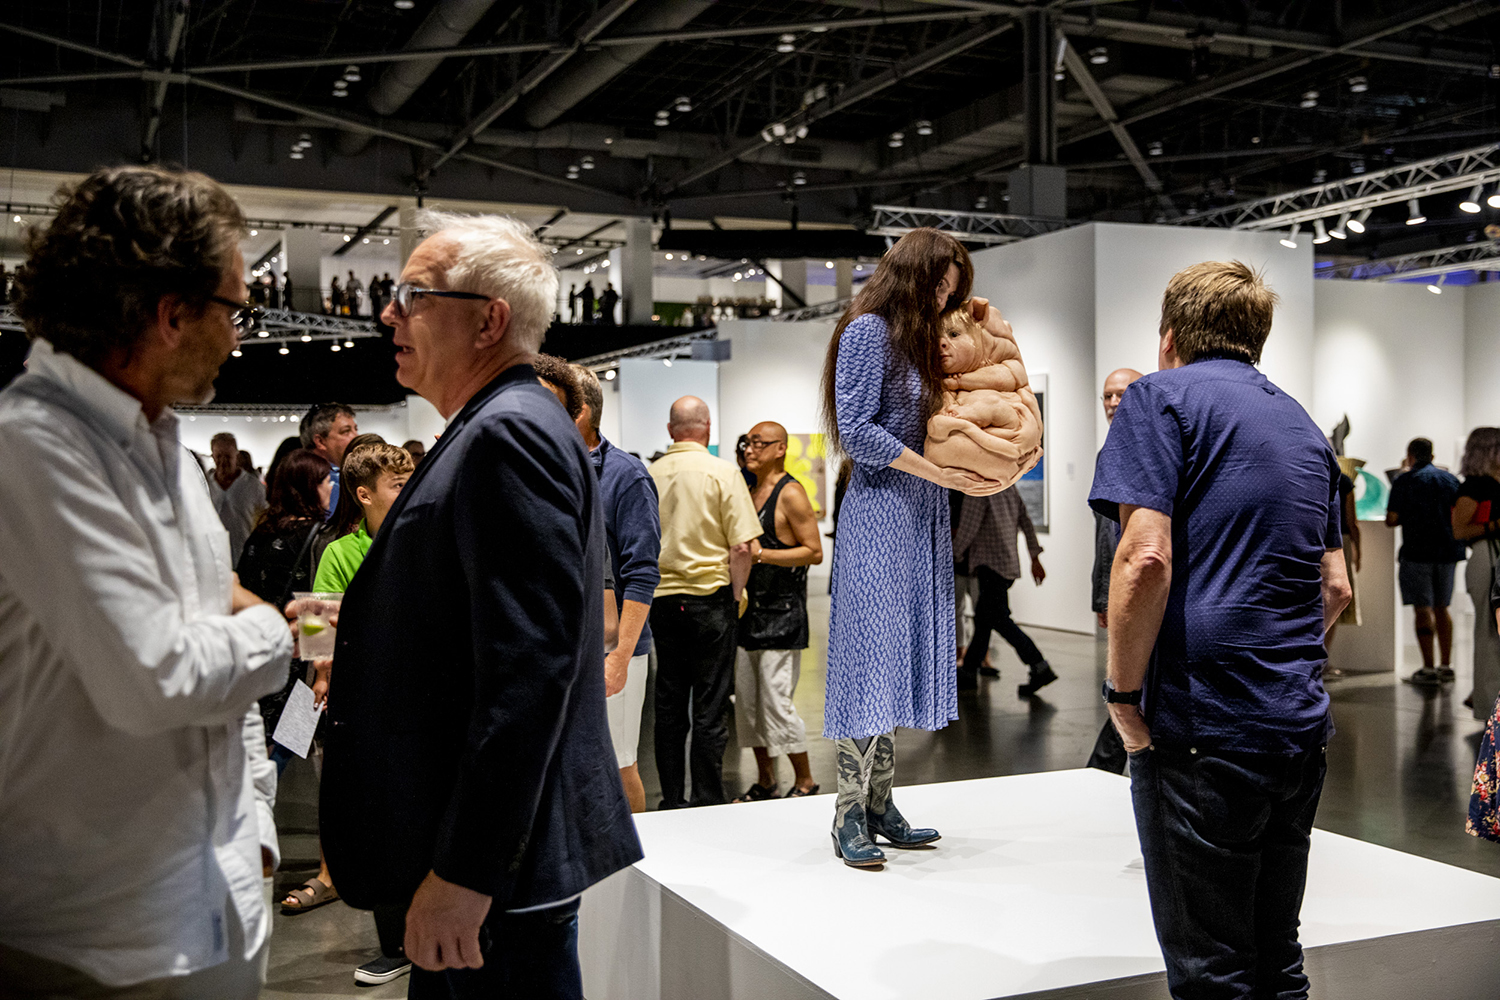 “The Bond and The Loafers” by Patricia Piccinini during the Seattle Art Fair at CenturyLink Field Event Center on Aug. 1, 2019.